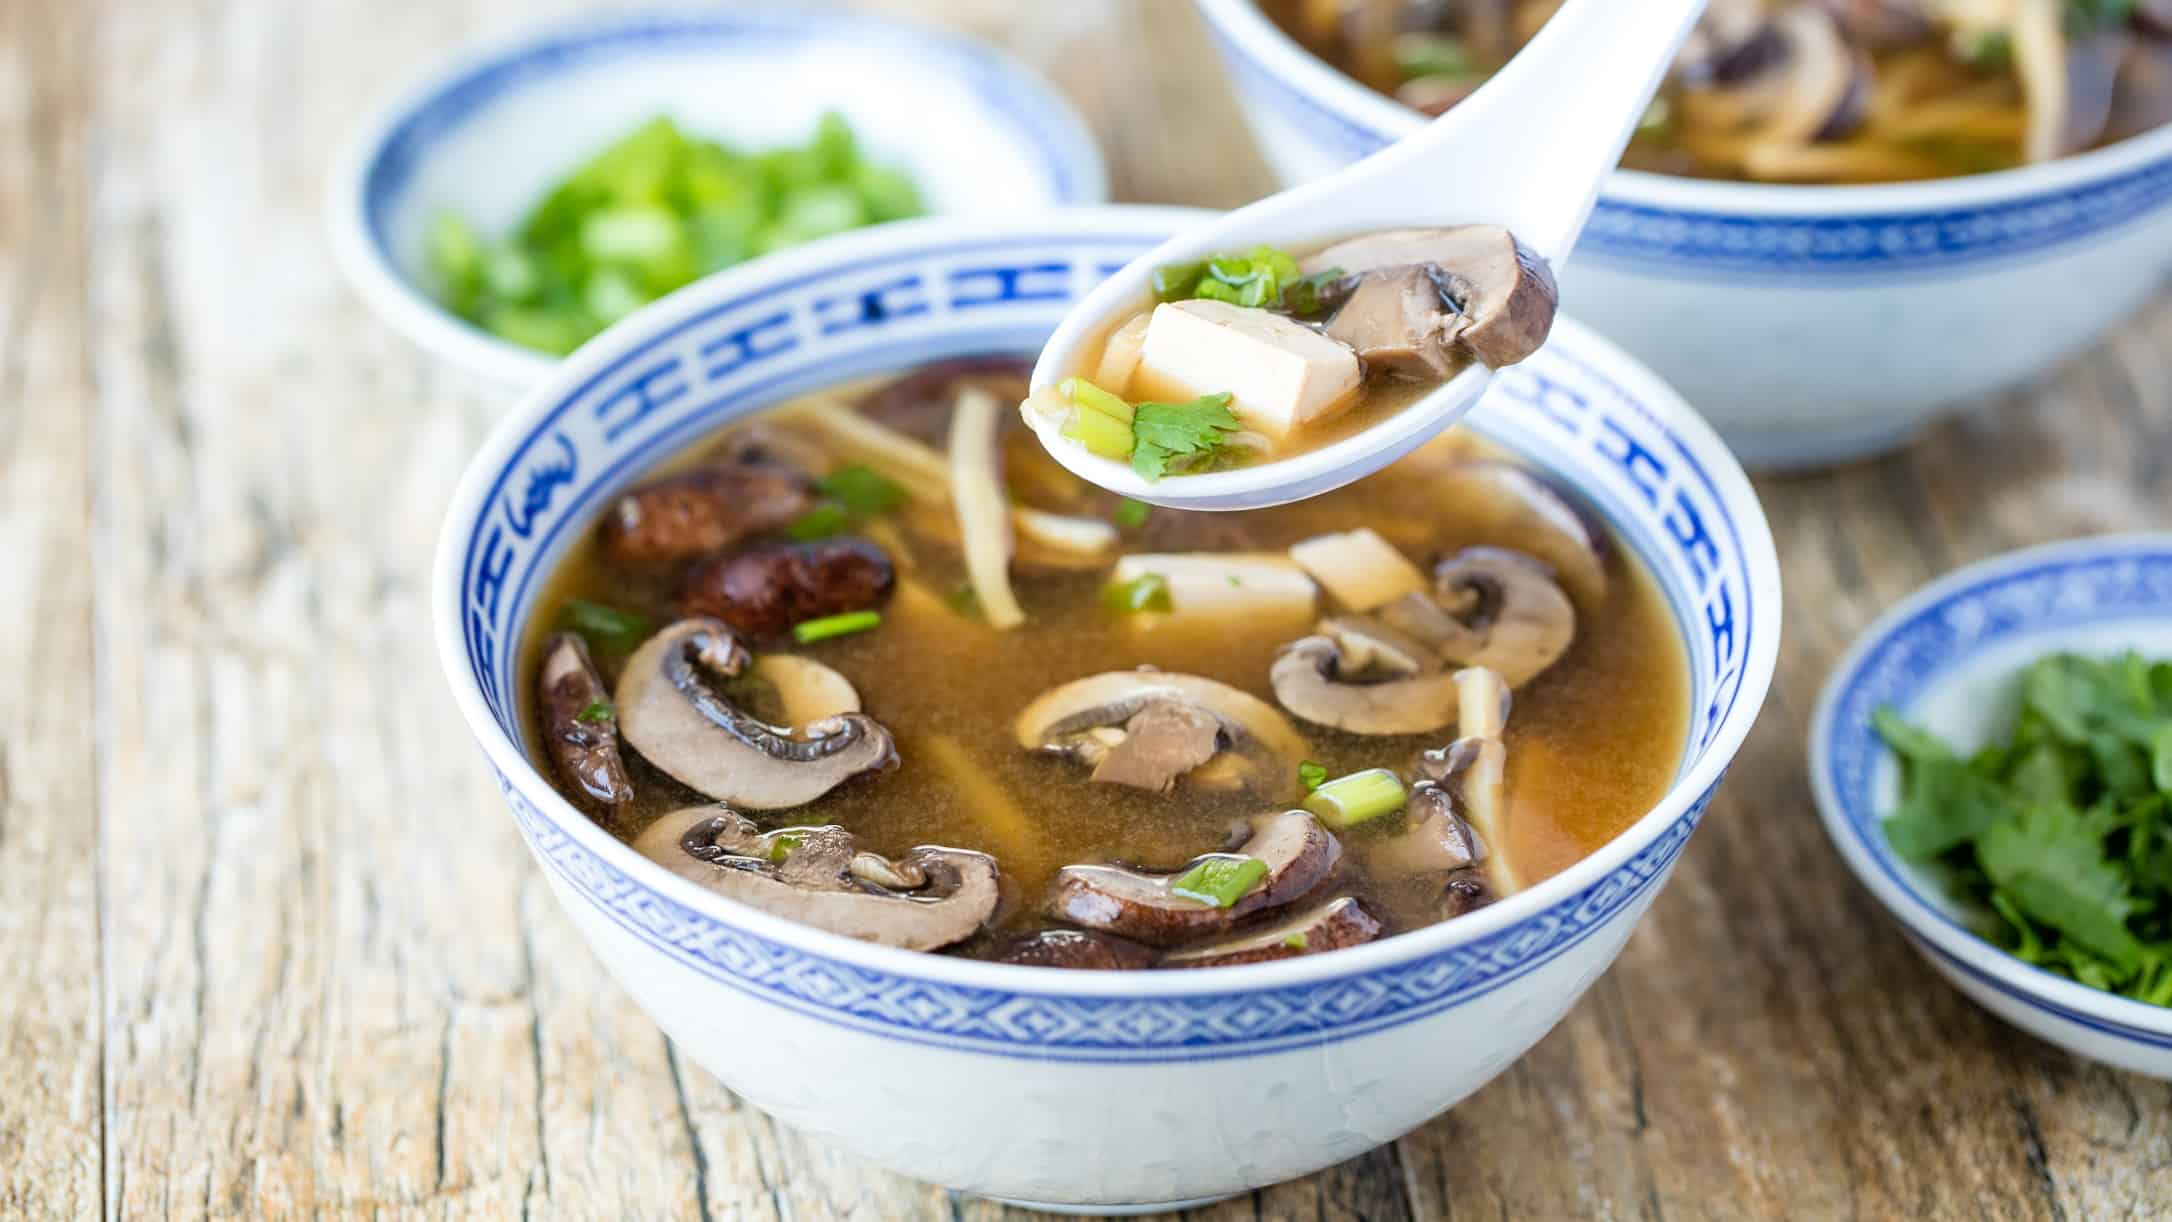 Hot and sour soup in a bowl with blue decorative trim